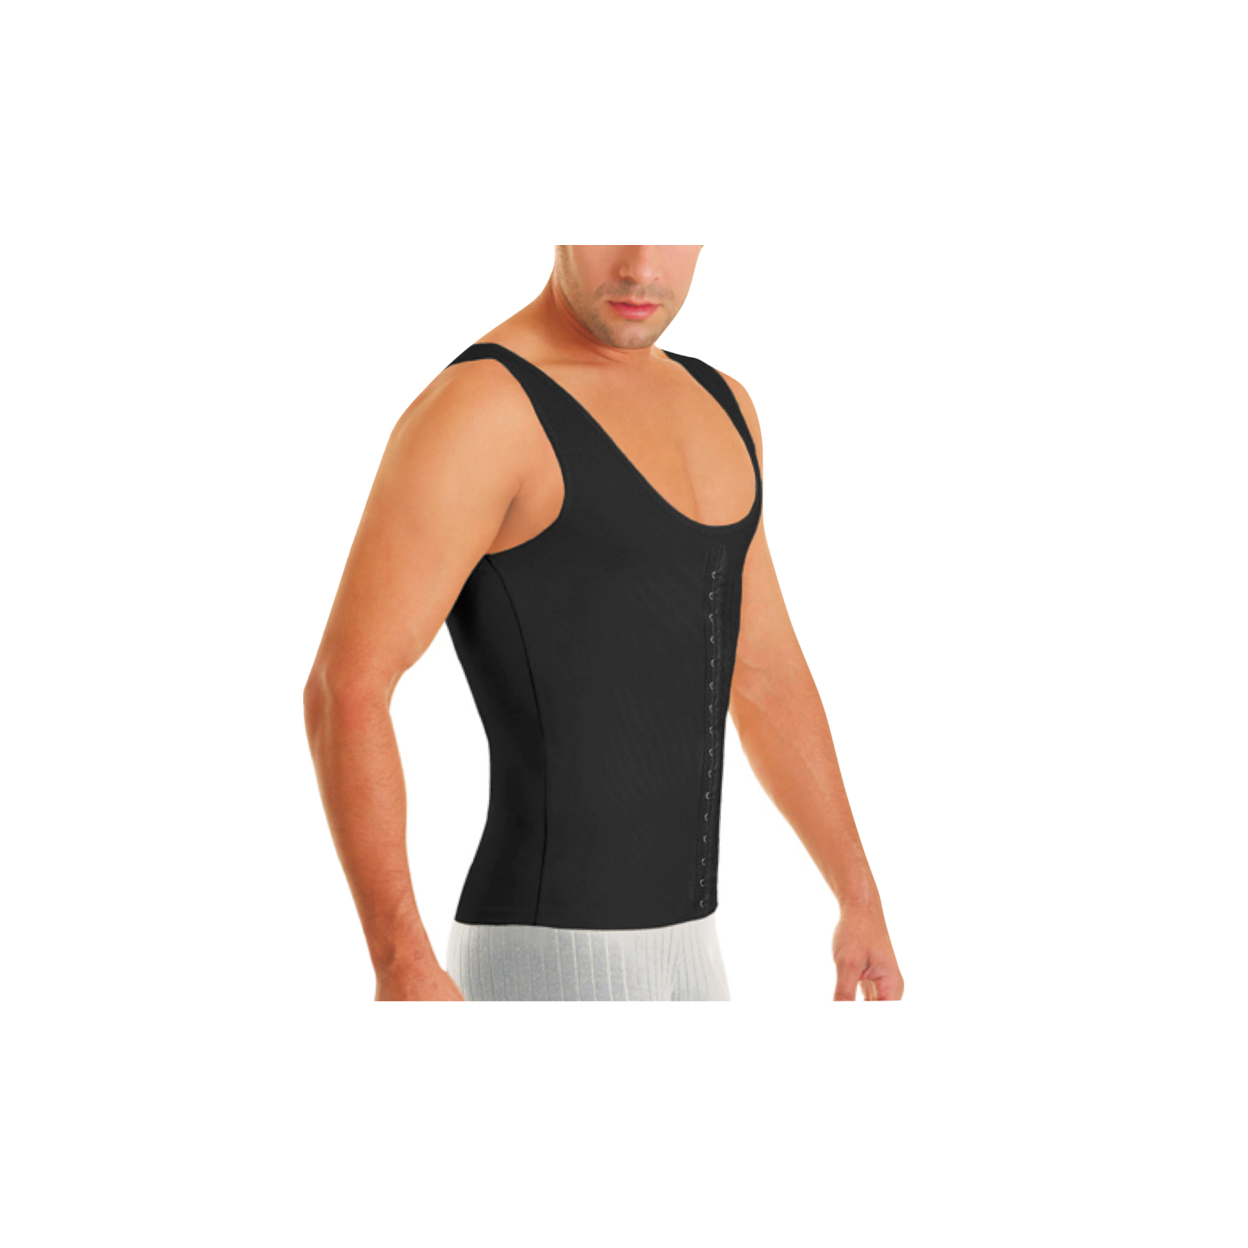 Men Waistcoat High-Compression Body Shaper In Regular And Plus Sizes - Nude, Large